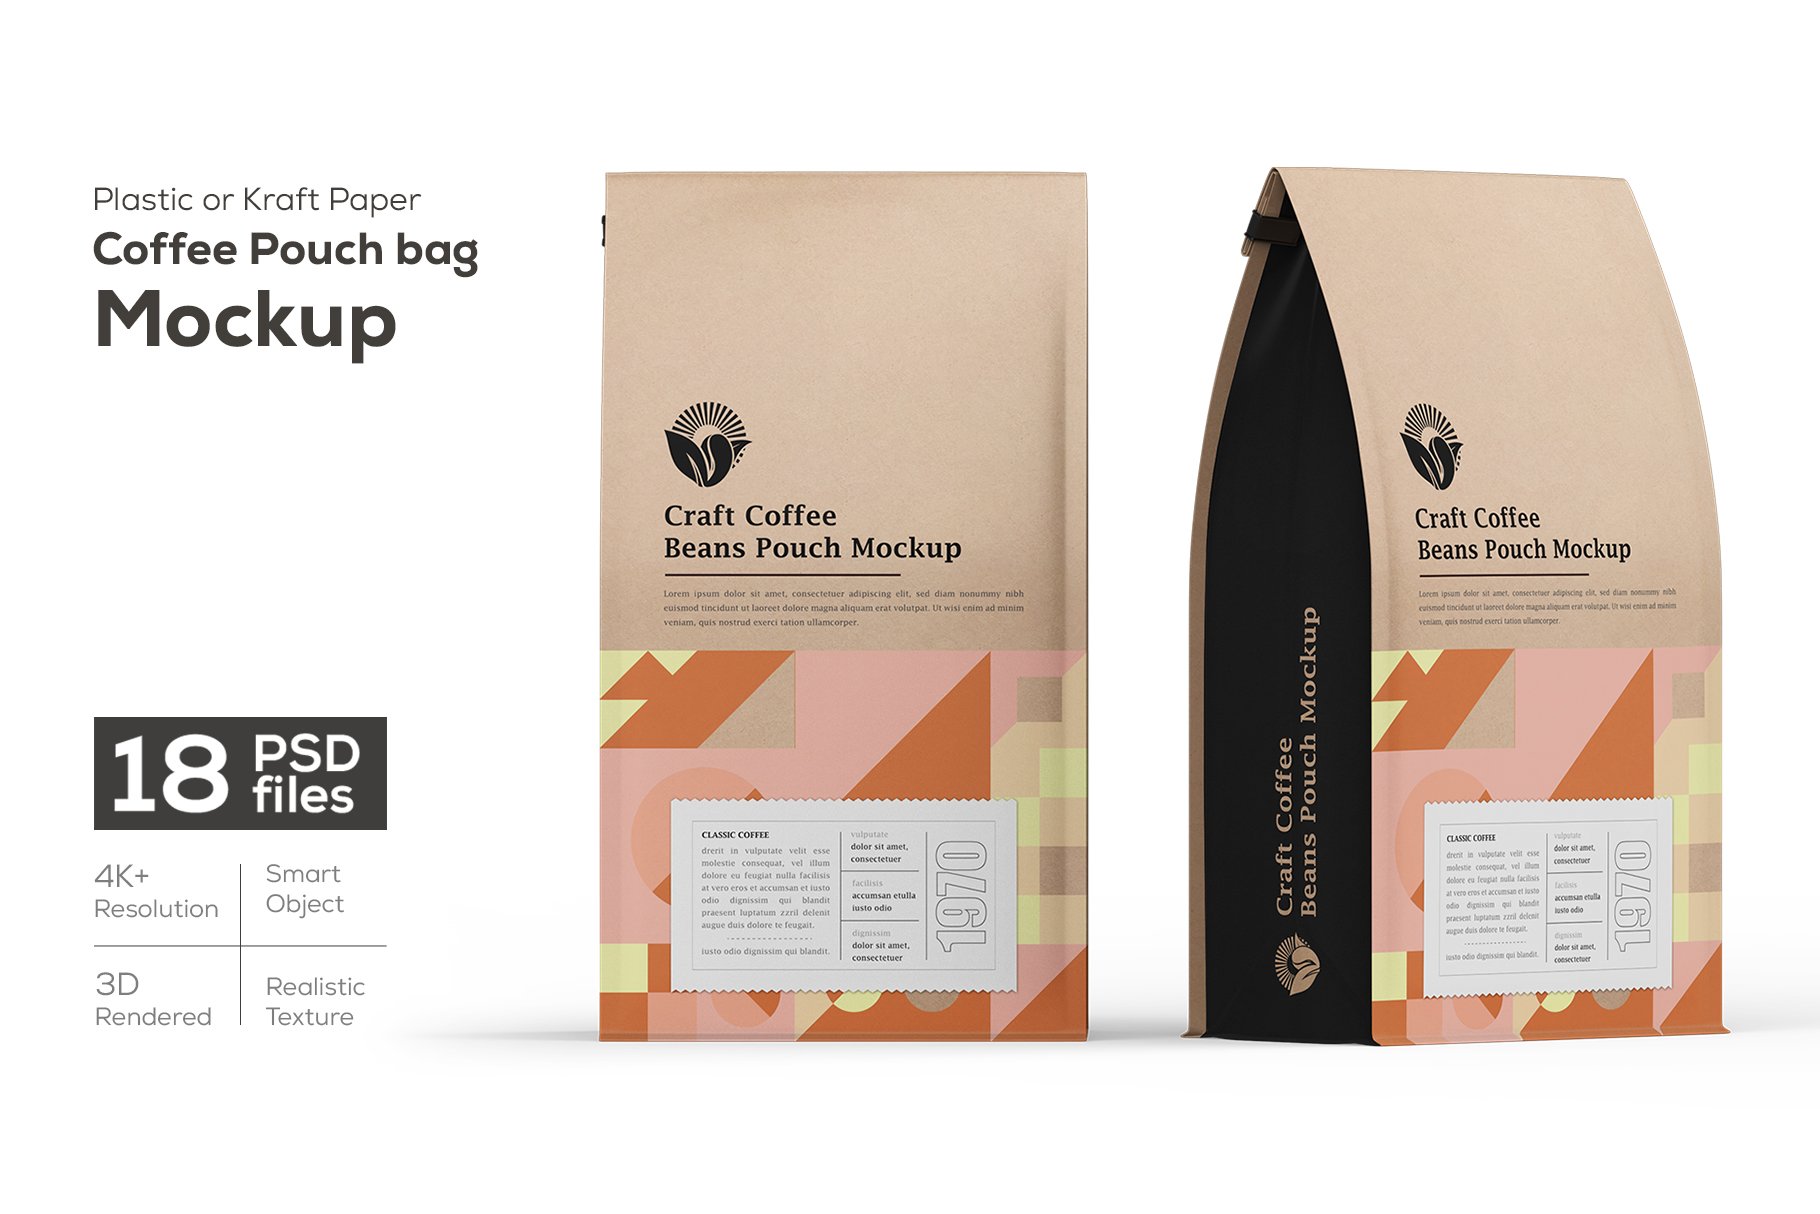 Food or Coffee Pouch Bag Mockup cover image.